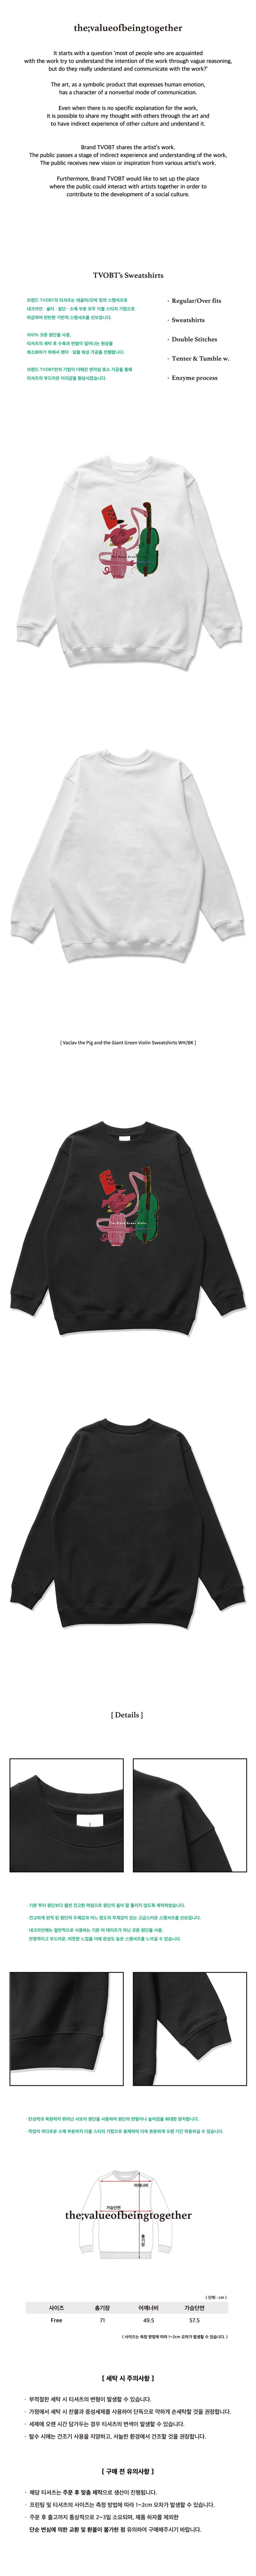 Vaclav the Pig and the Giant Green Violin Sweatshirts WH/BK